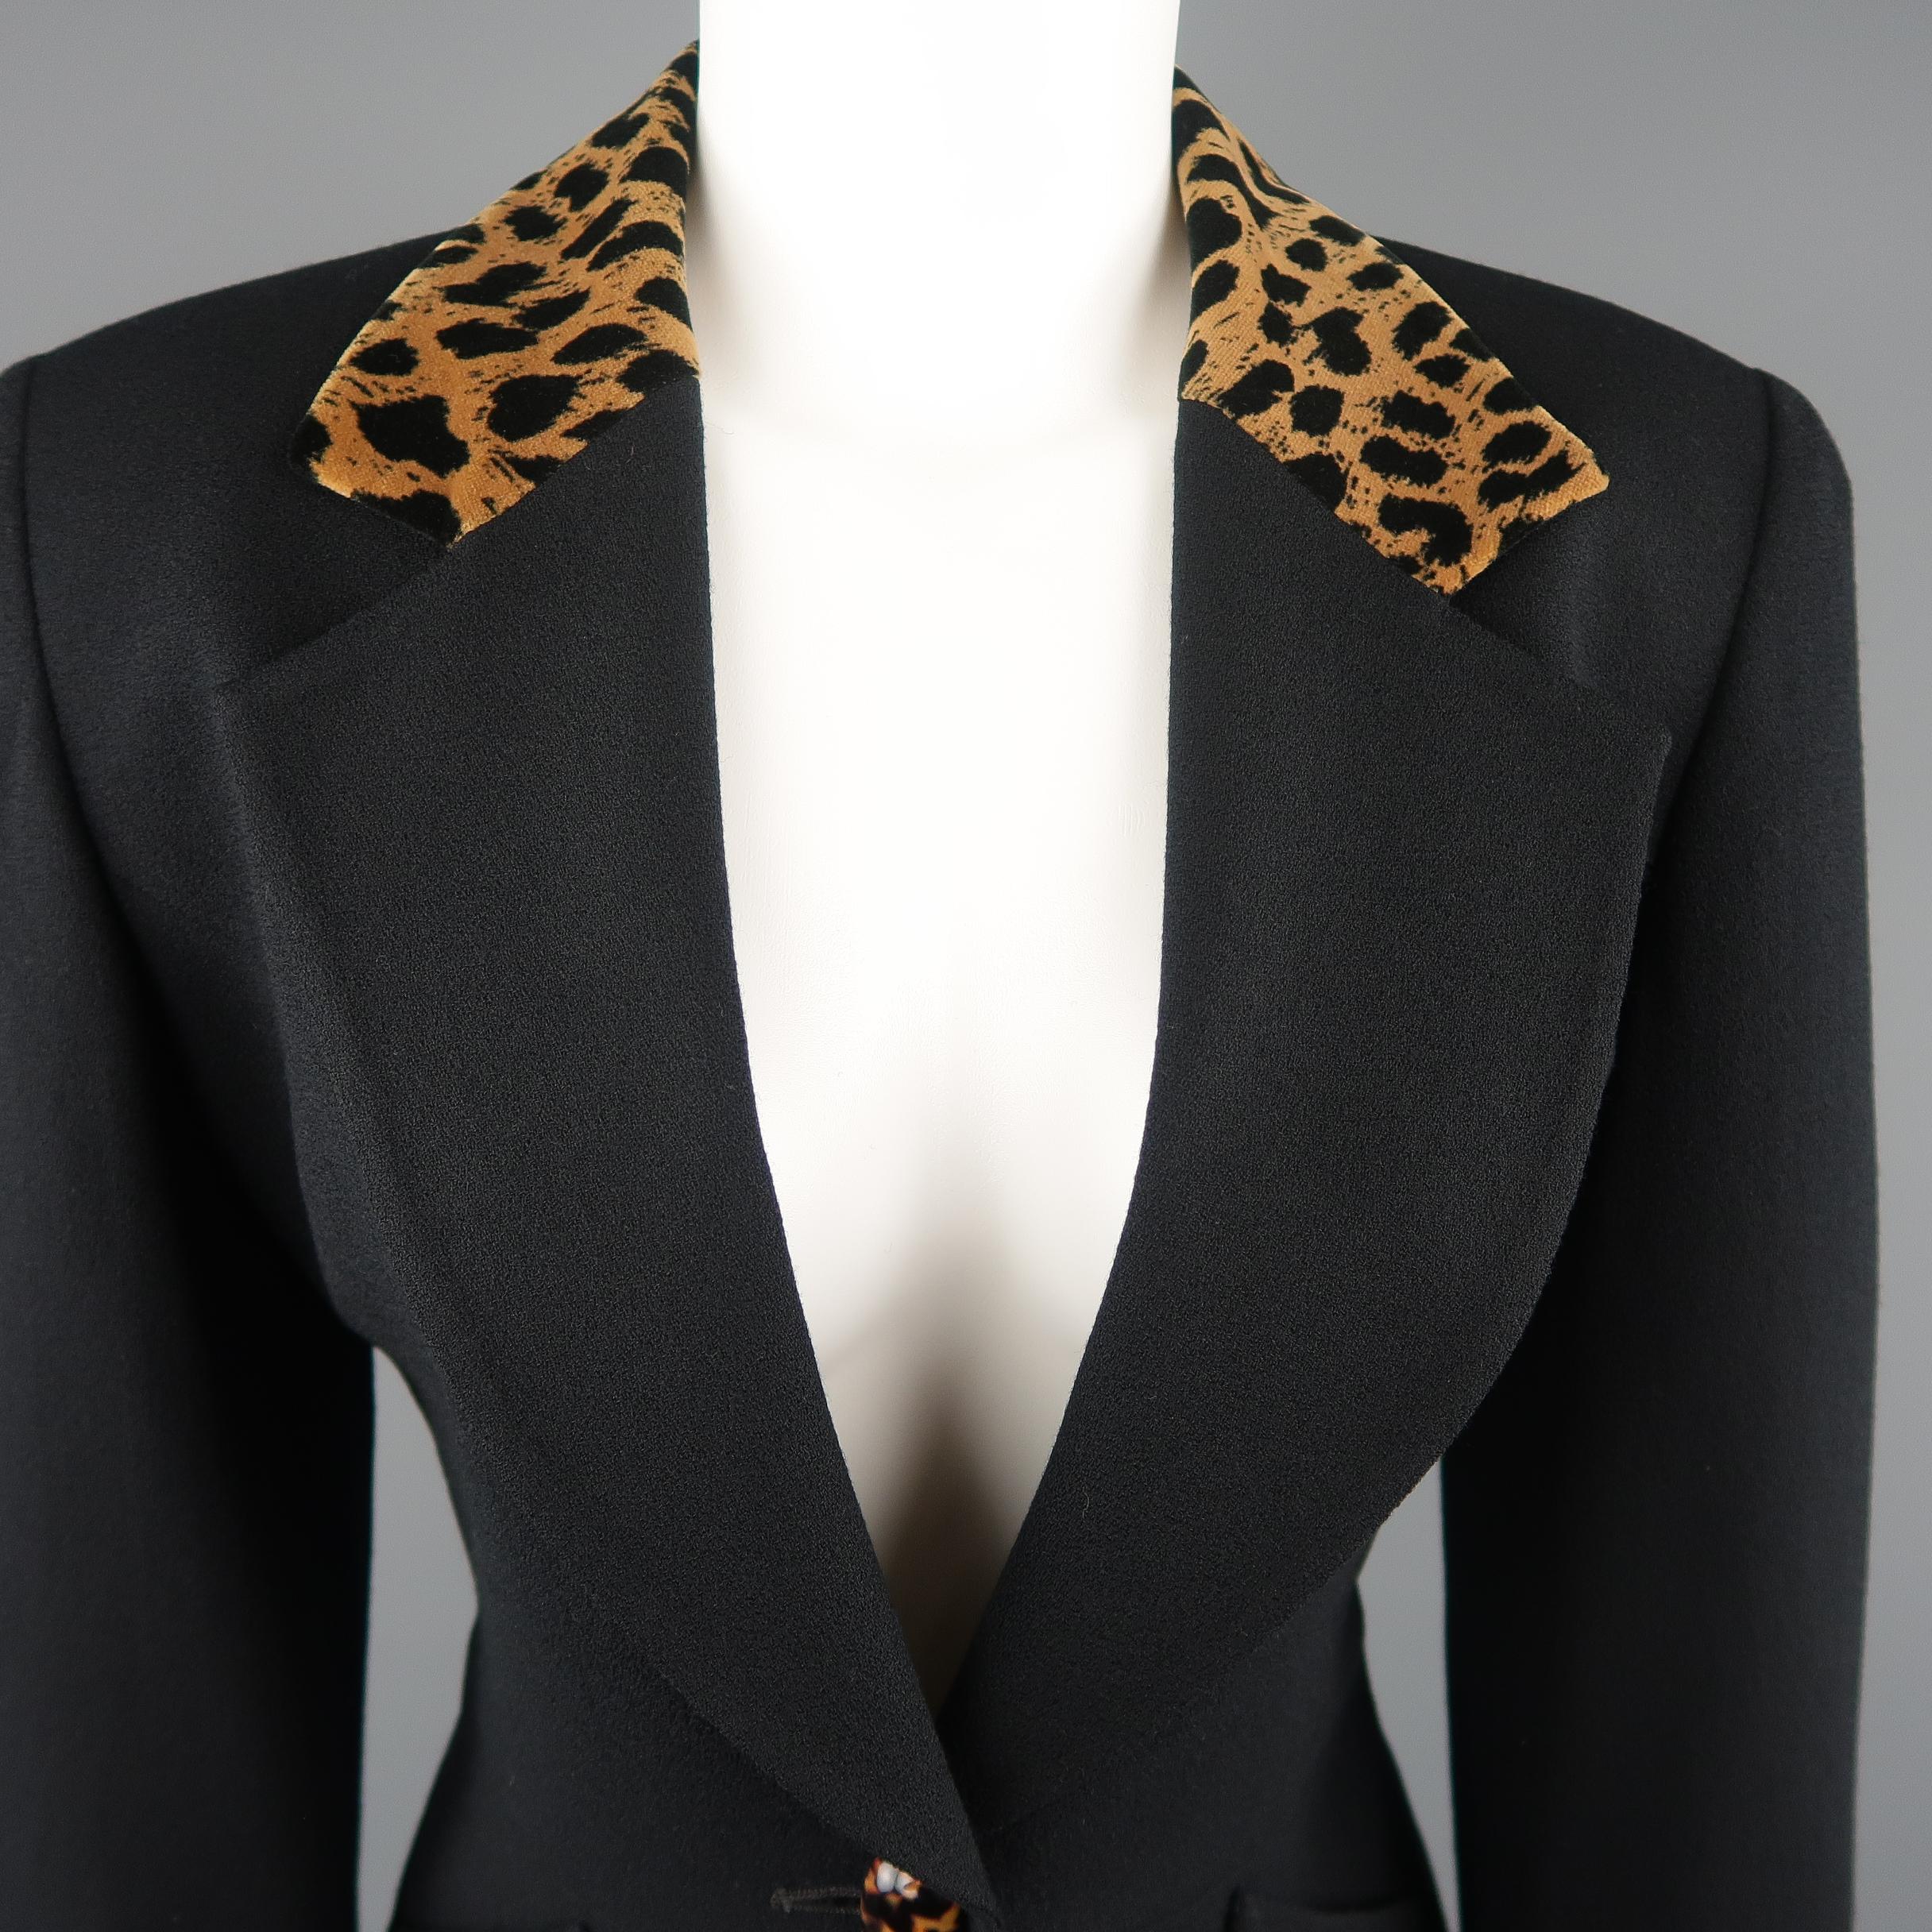 Vintage CHRISTIAN DIOR cropped jacket comes in black wool crepe with a pointed lapel, single button closure, slanted pockets, and cheetah print velvet collar. Made in USA.
 
Excellent Pre-Owned Condition.
Marked: 4
 
Measurements:
 
Shoulder: 16